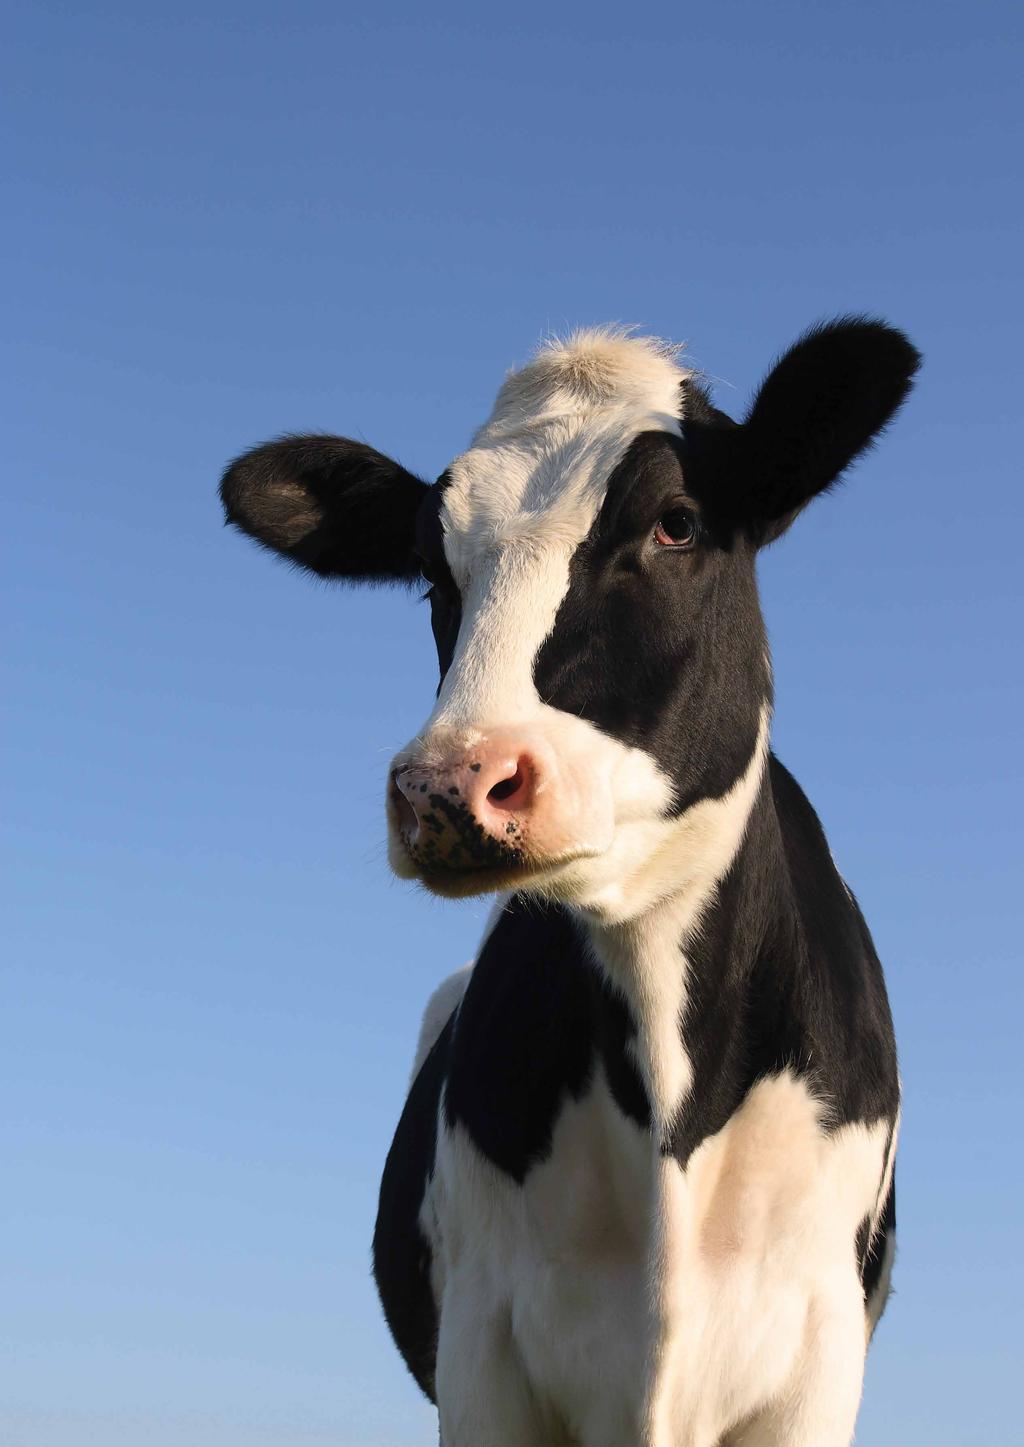 The Dairy Cow: Beyond